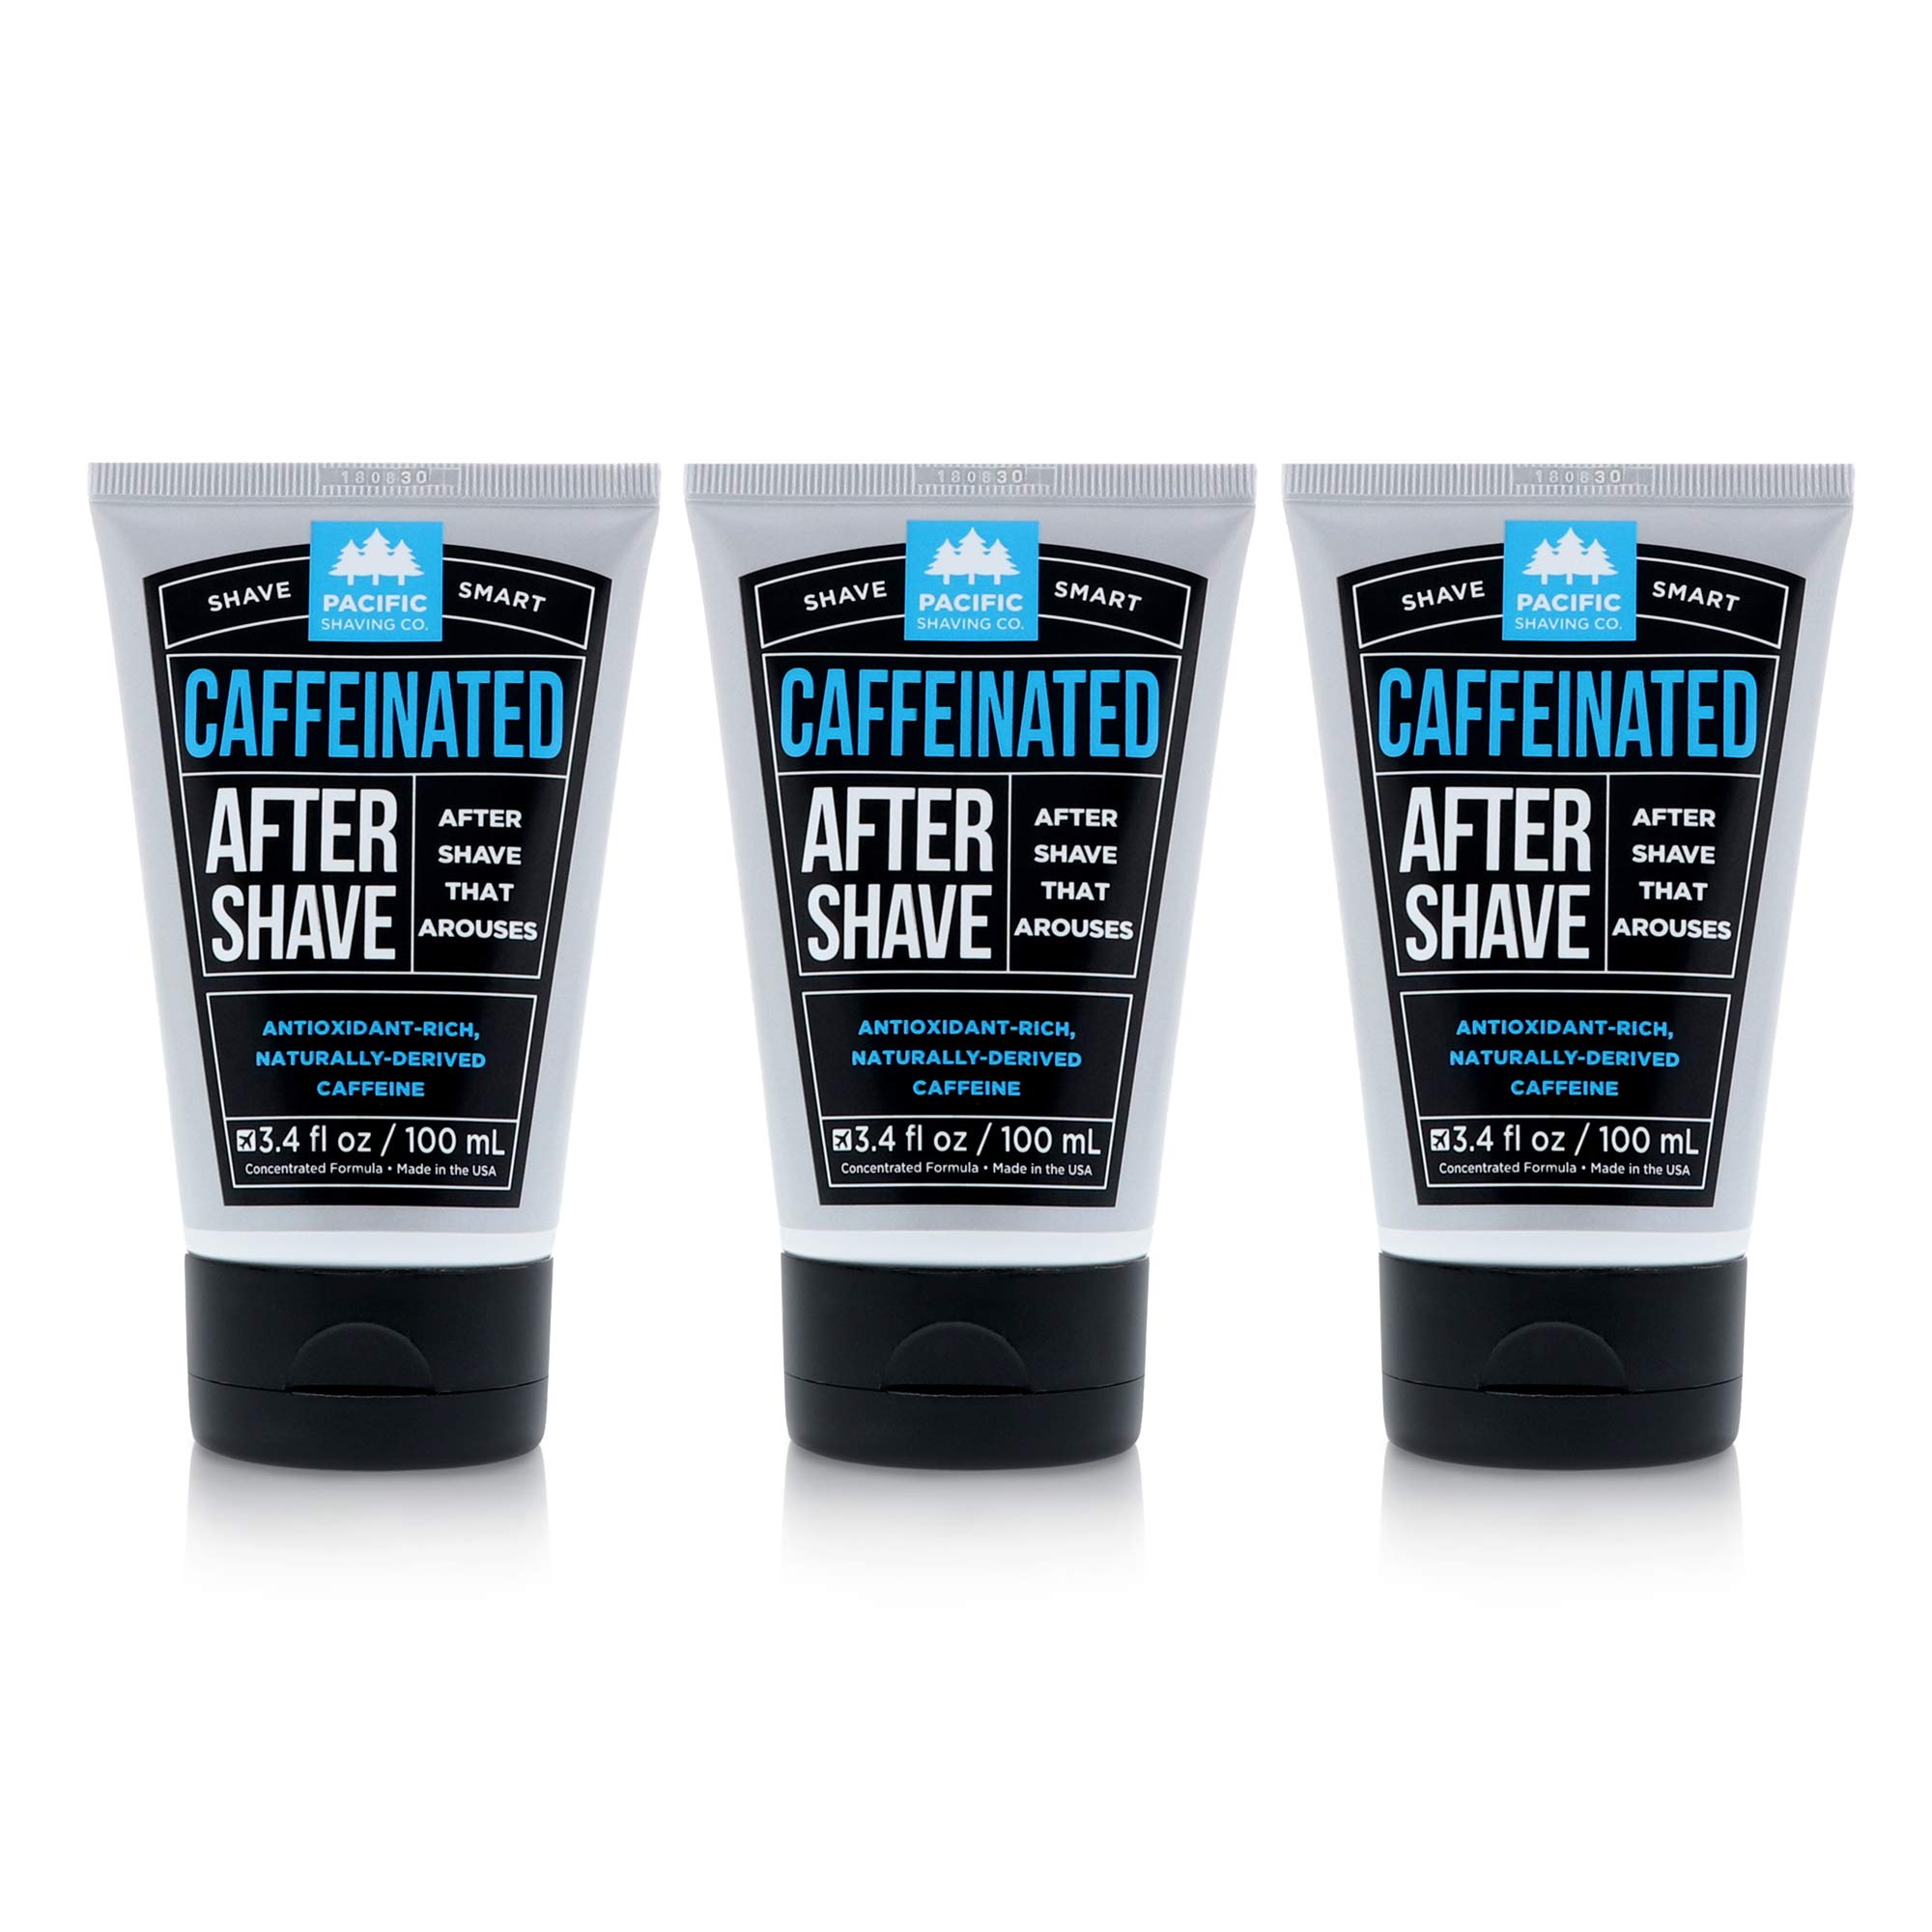 Pacific Shaving company caffeinated Aftershave - Helps Reduce Appearance of Redness, With Safe, Natural, and Plant-Derived Ingre